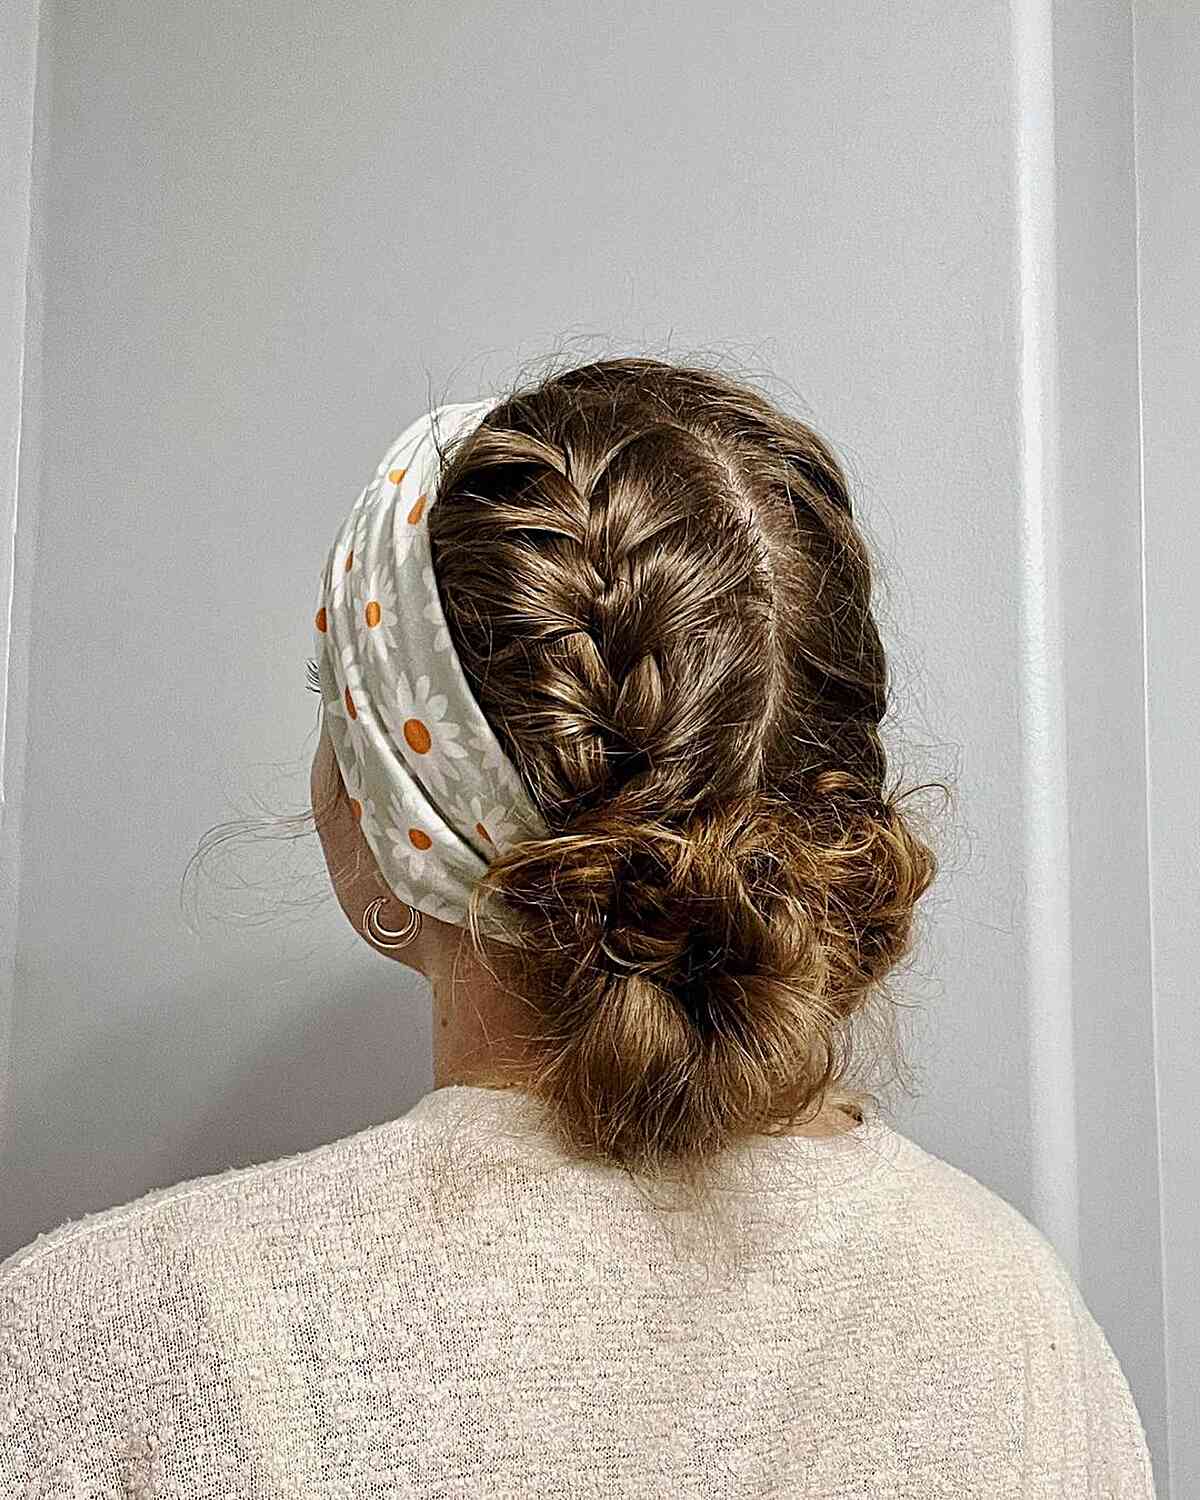 Double Braids with Bandana for a Festival